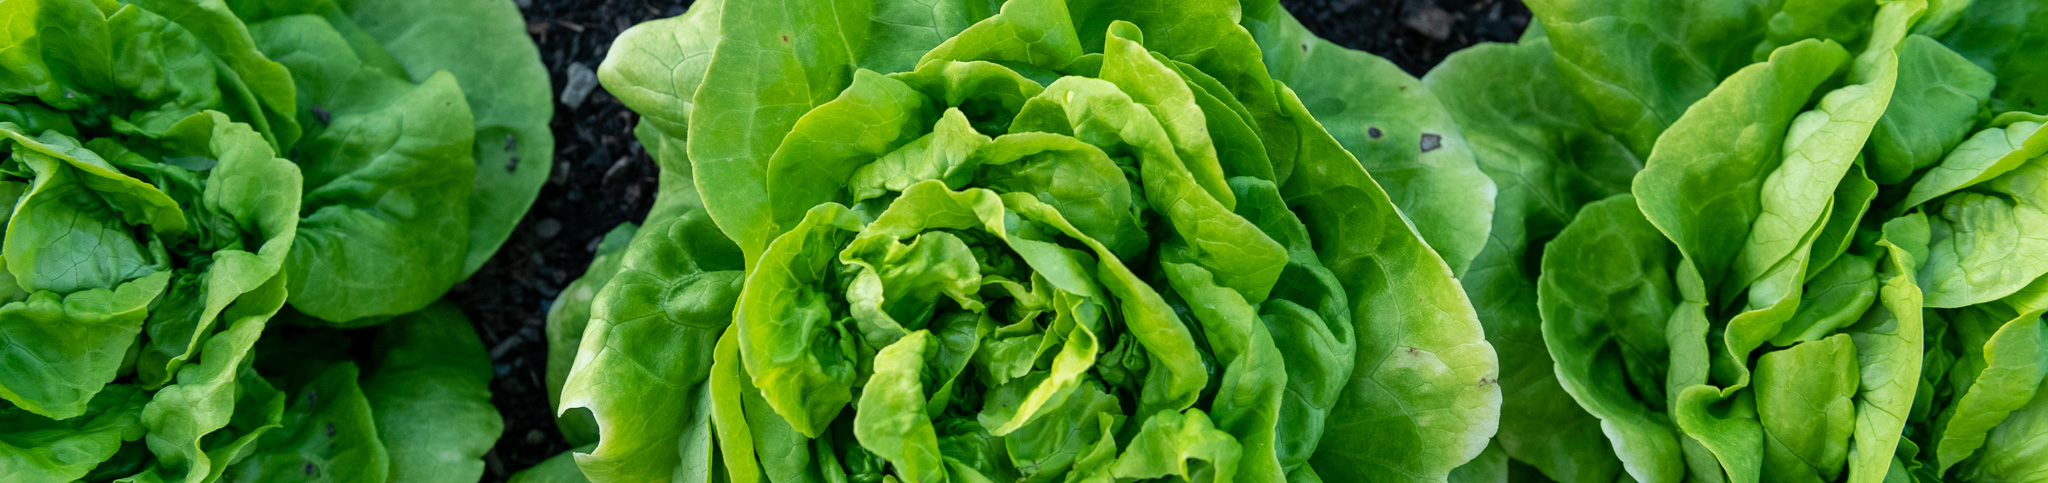 green lettuce from the Tait Preserve